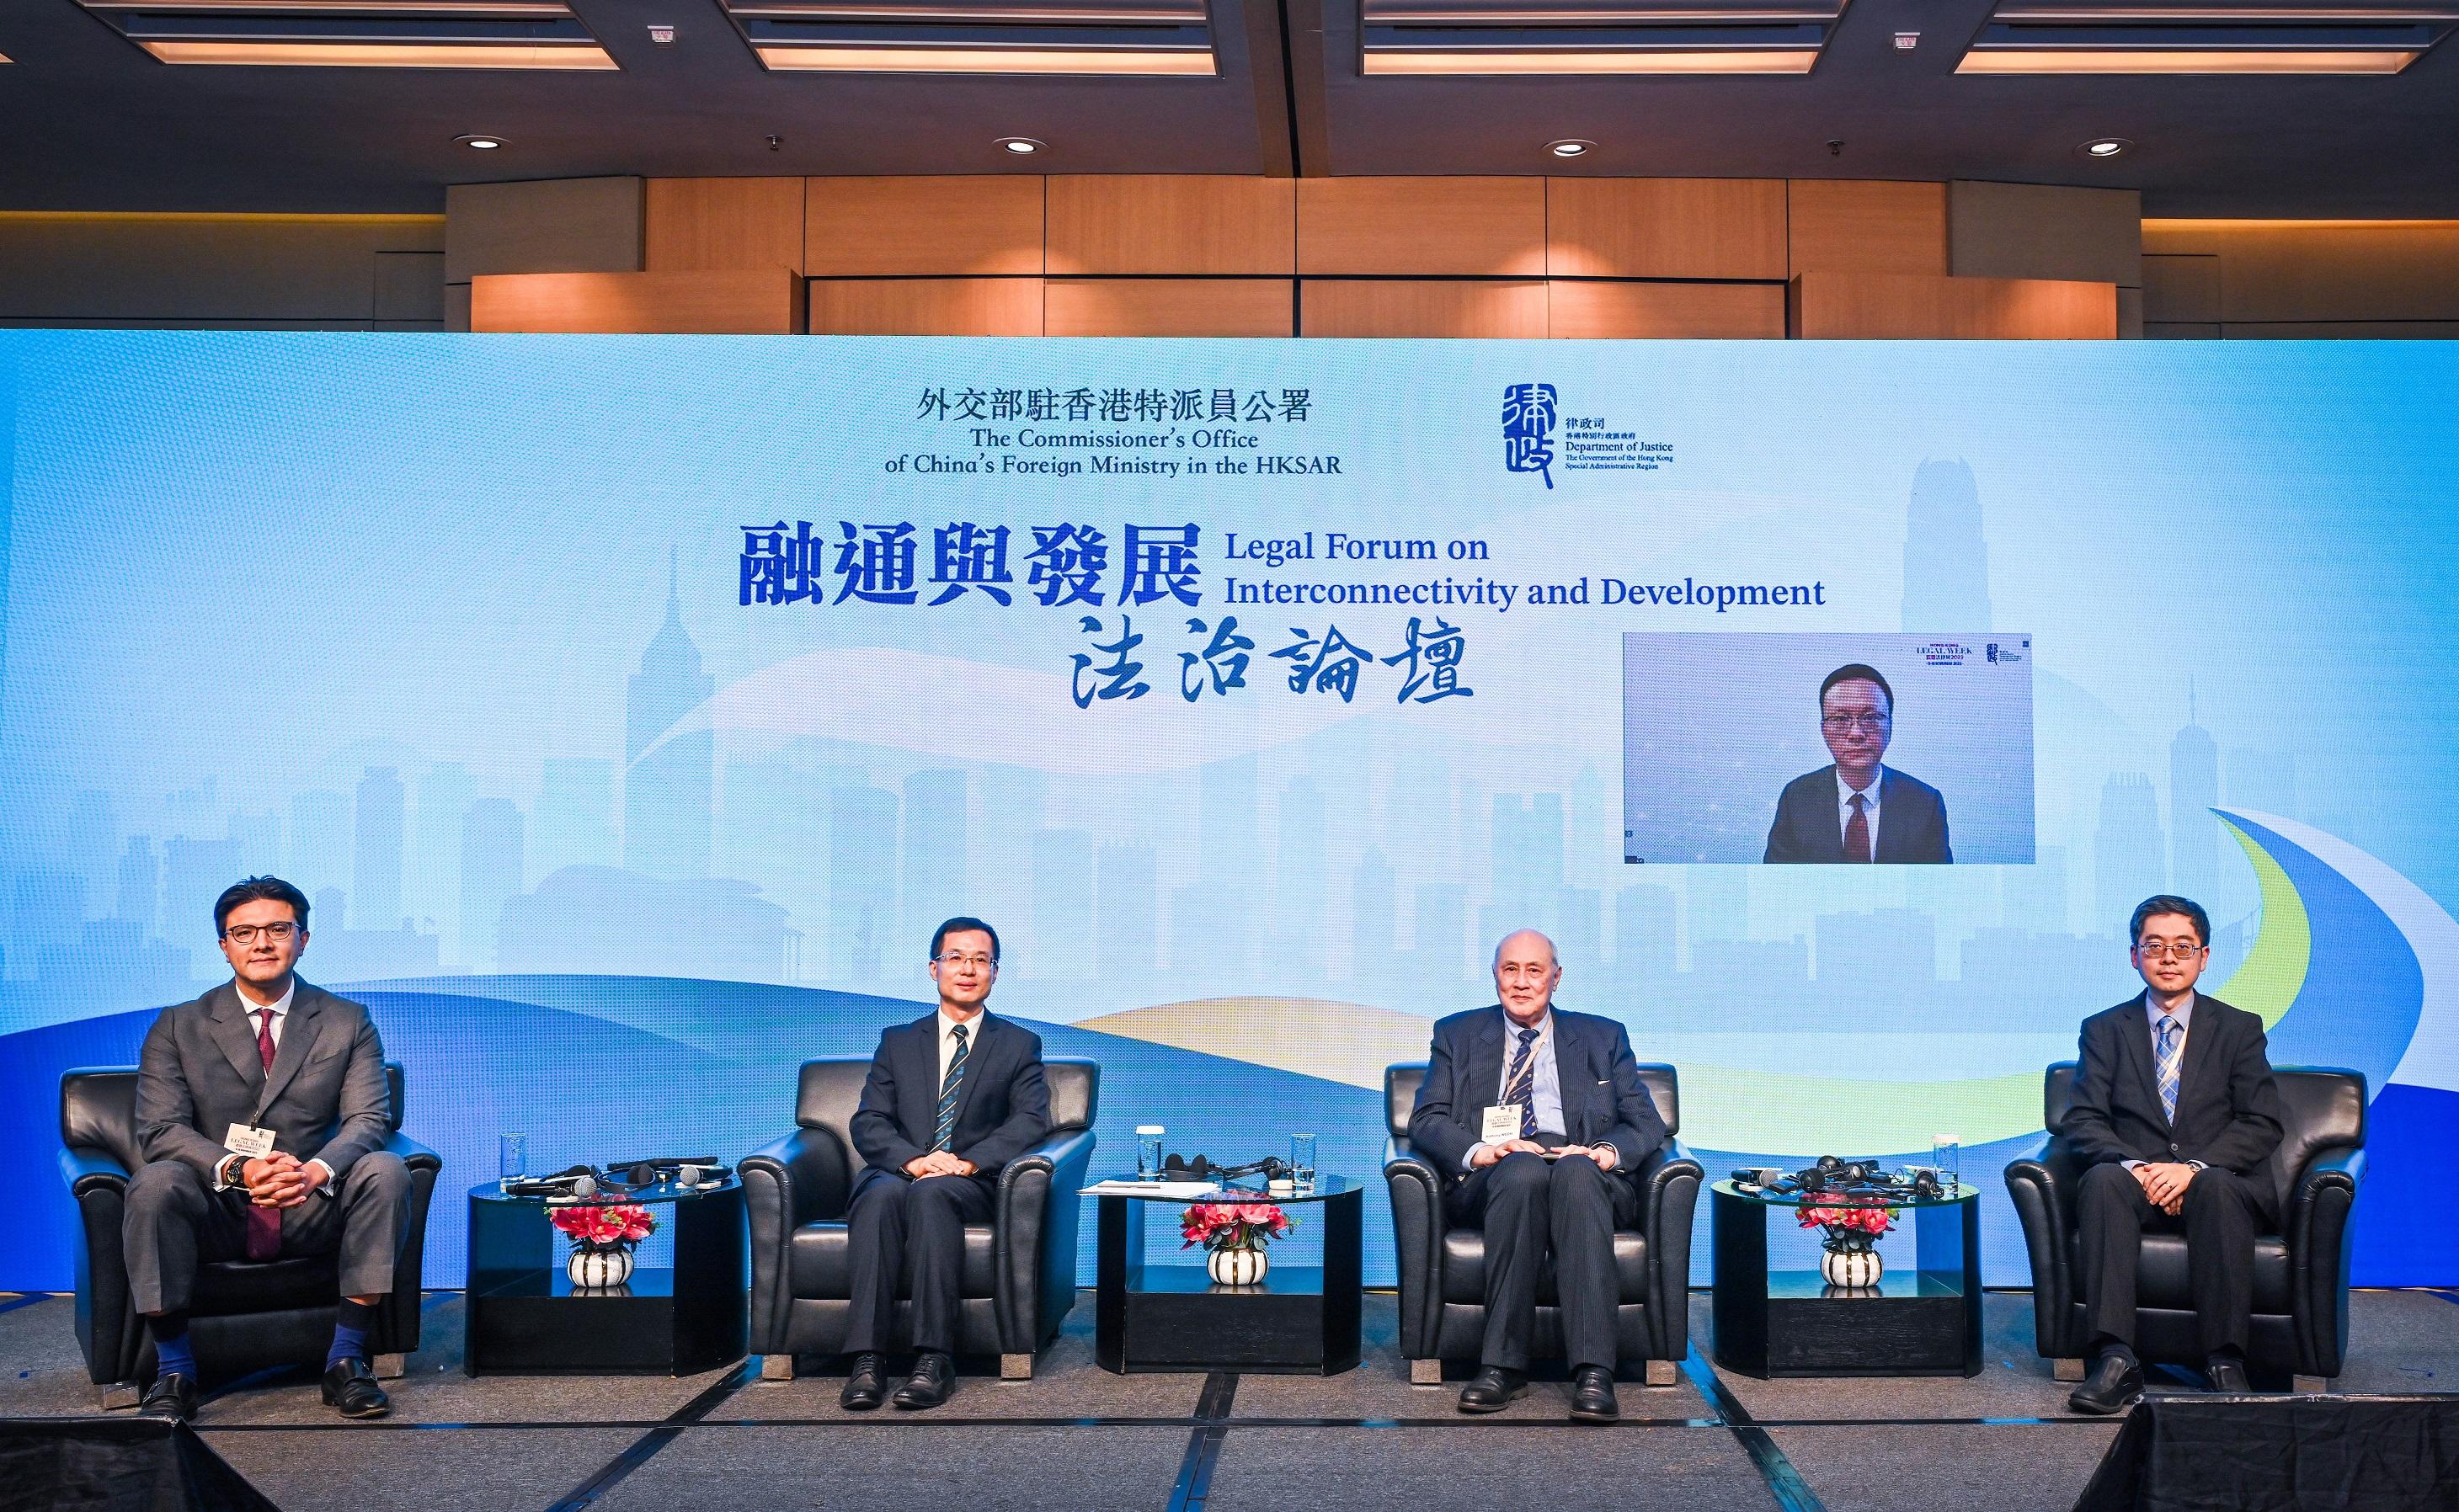 As part of the Hong Kong Legal Week 2023, the Legal Forum on Interconnectivity and Development co-organised by the Office of the Commissioner of the Ministry of Foreign Affairs in the Hong Kong Special Administrative Region and the Department of Justice (DoJ) was held successfully today (November 7). Photo shows (from left) Vice-Chairman of the Hong Kong Bar Association Mr José-Antonio Maurellet, SC; the Representative of Regional Office for Asia and the Pacific of the Hague Conference on Private International Law and Associate Dean of the Faculty of Law of the University of Hong Kong, Professor Zhao Yun; Co-Chairman of the Asian Academy of International Law, Dr Anthony Neoh; Qian Duansheng Chair Professor of China University of Political Science and Law and Changjiang Scholars Distinguished Professor of the Ministry of Education of the People's Republic of China, Professor Huo Zhengxin (on screen); and Law Officer (International Law) of the DoJ, Dr James Ding at panel session 2 on legal instruments in addressing external challenges. 